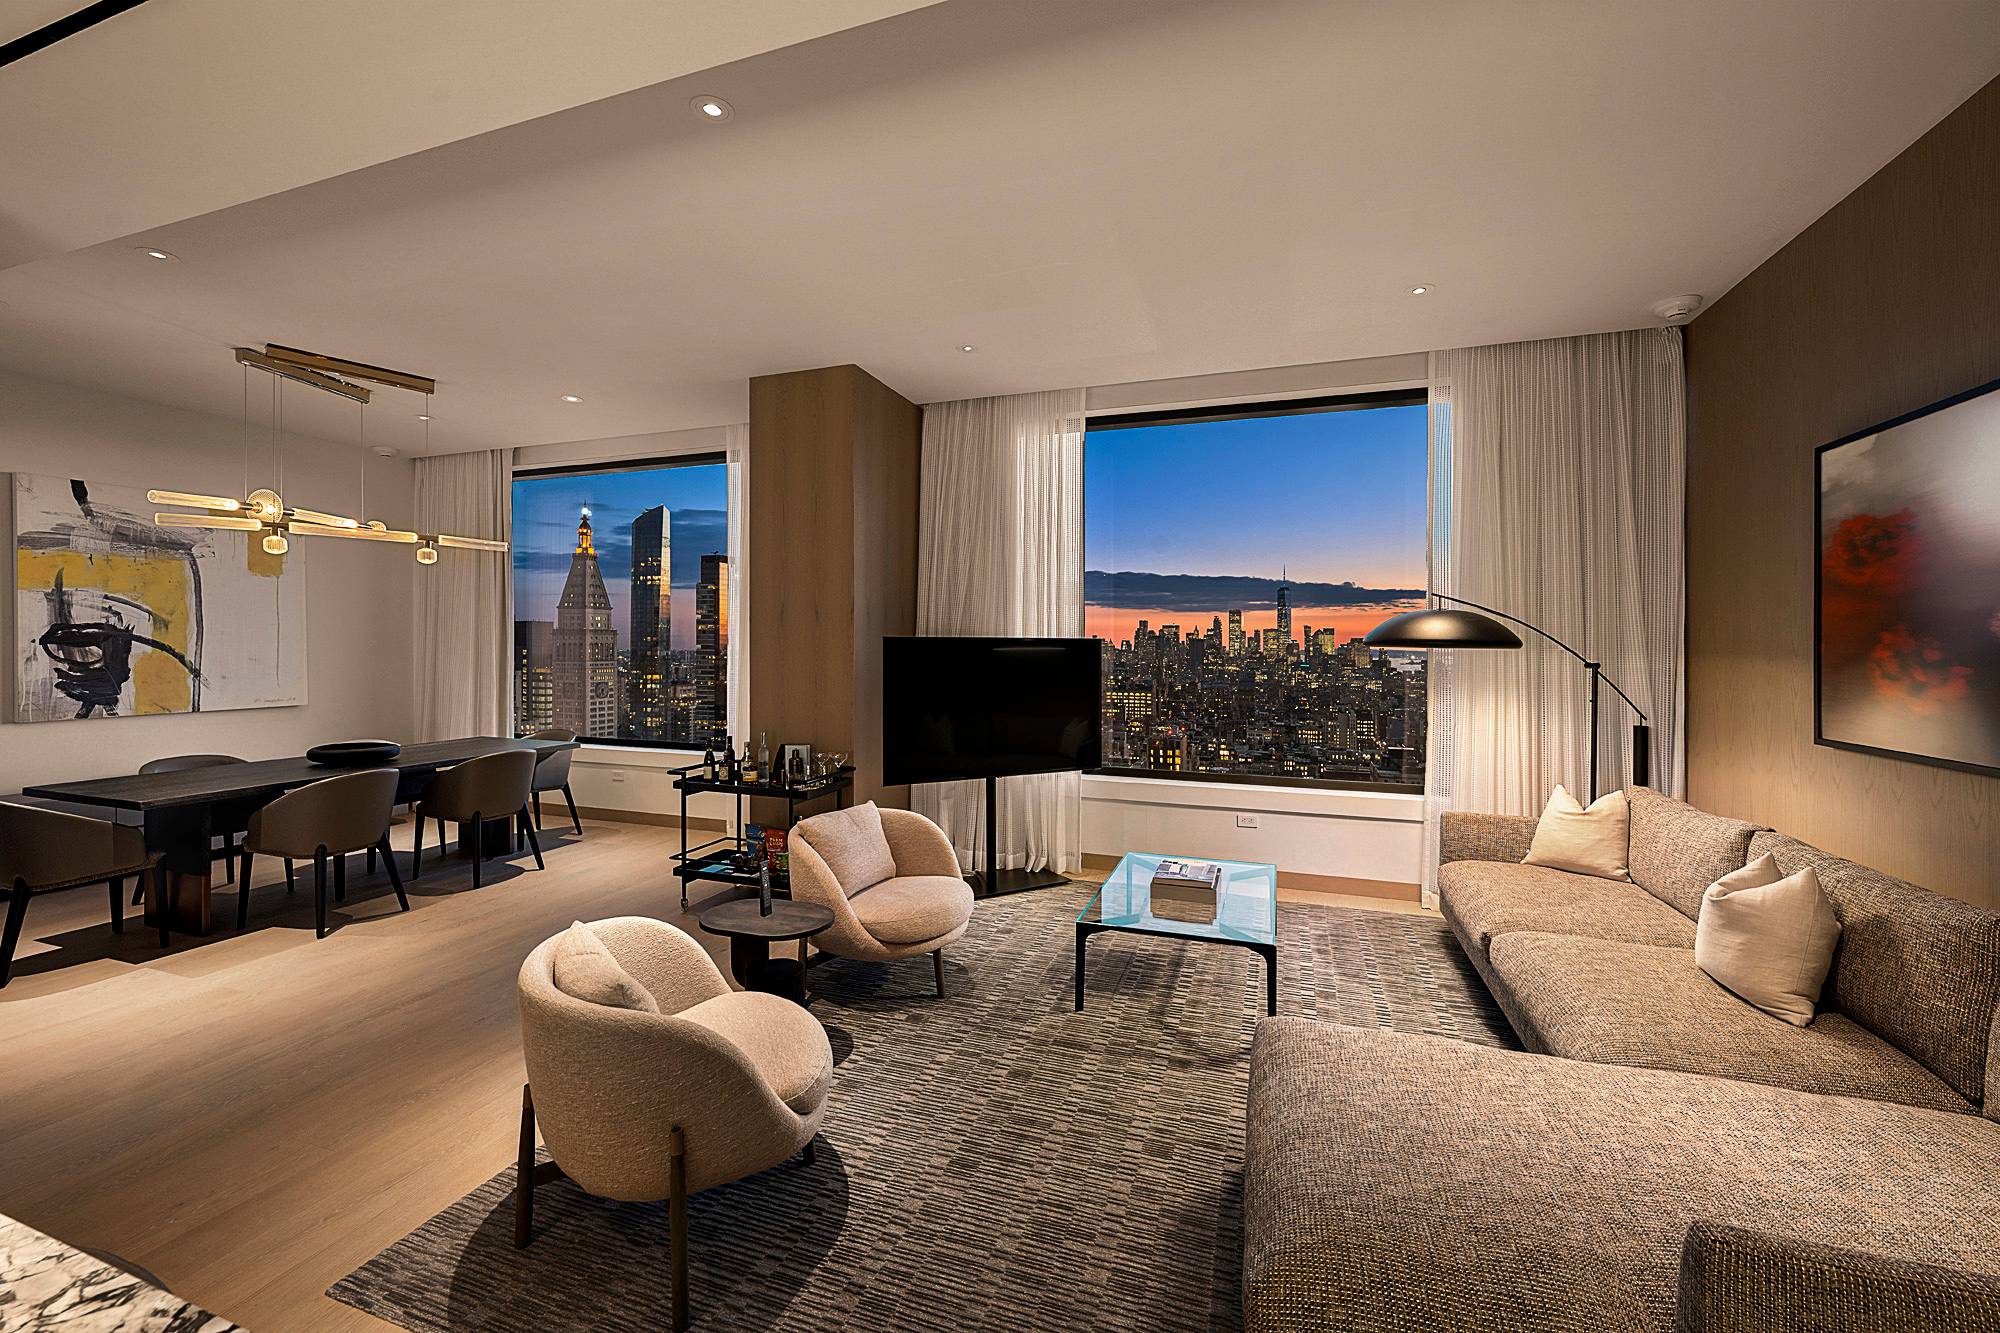 25 West 28th Street, PH41D Welcome to Penthouse 41D at the acclaimed Ritz Carlton Residences designed by legendary architect Rafael Vinoly.